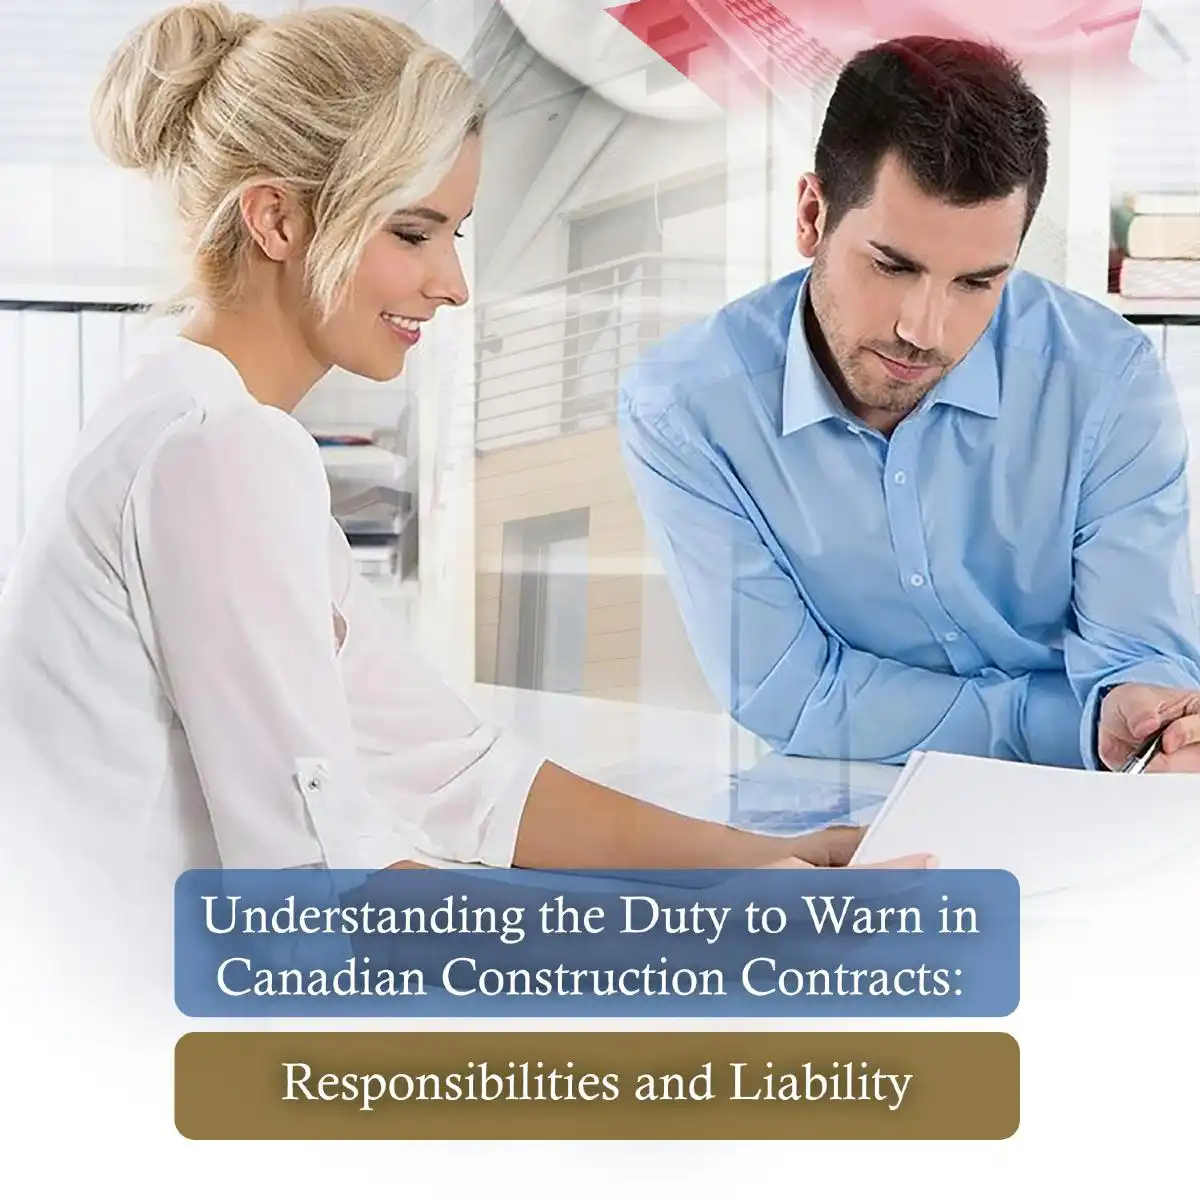 Understanding the Duty to Warn in Canadian Construction Contracts: Responsibilities and Liability